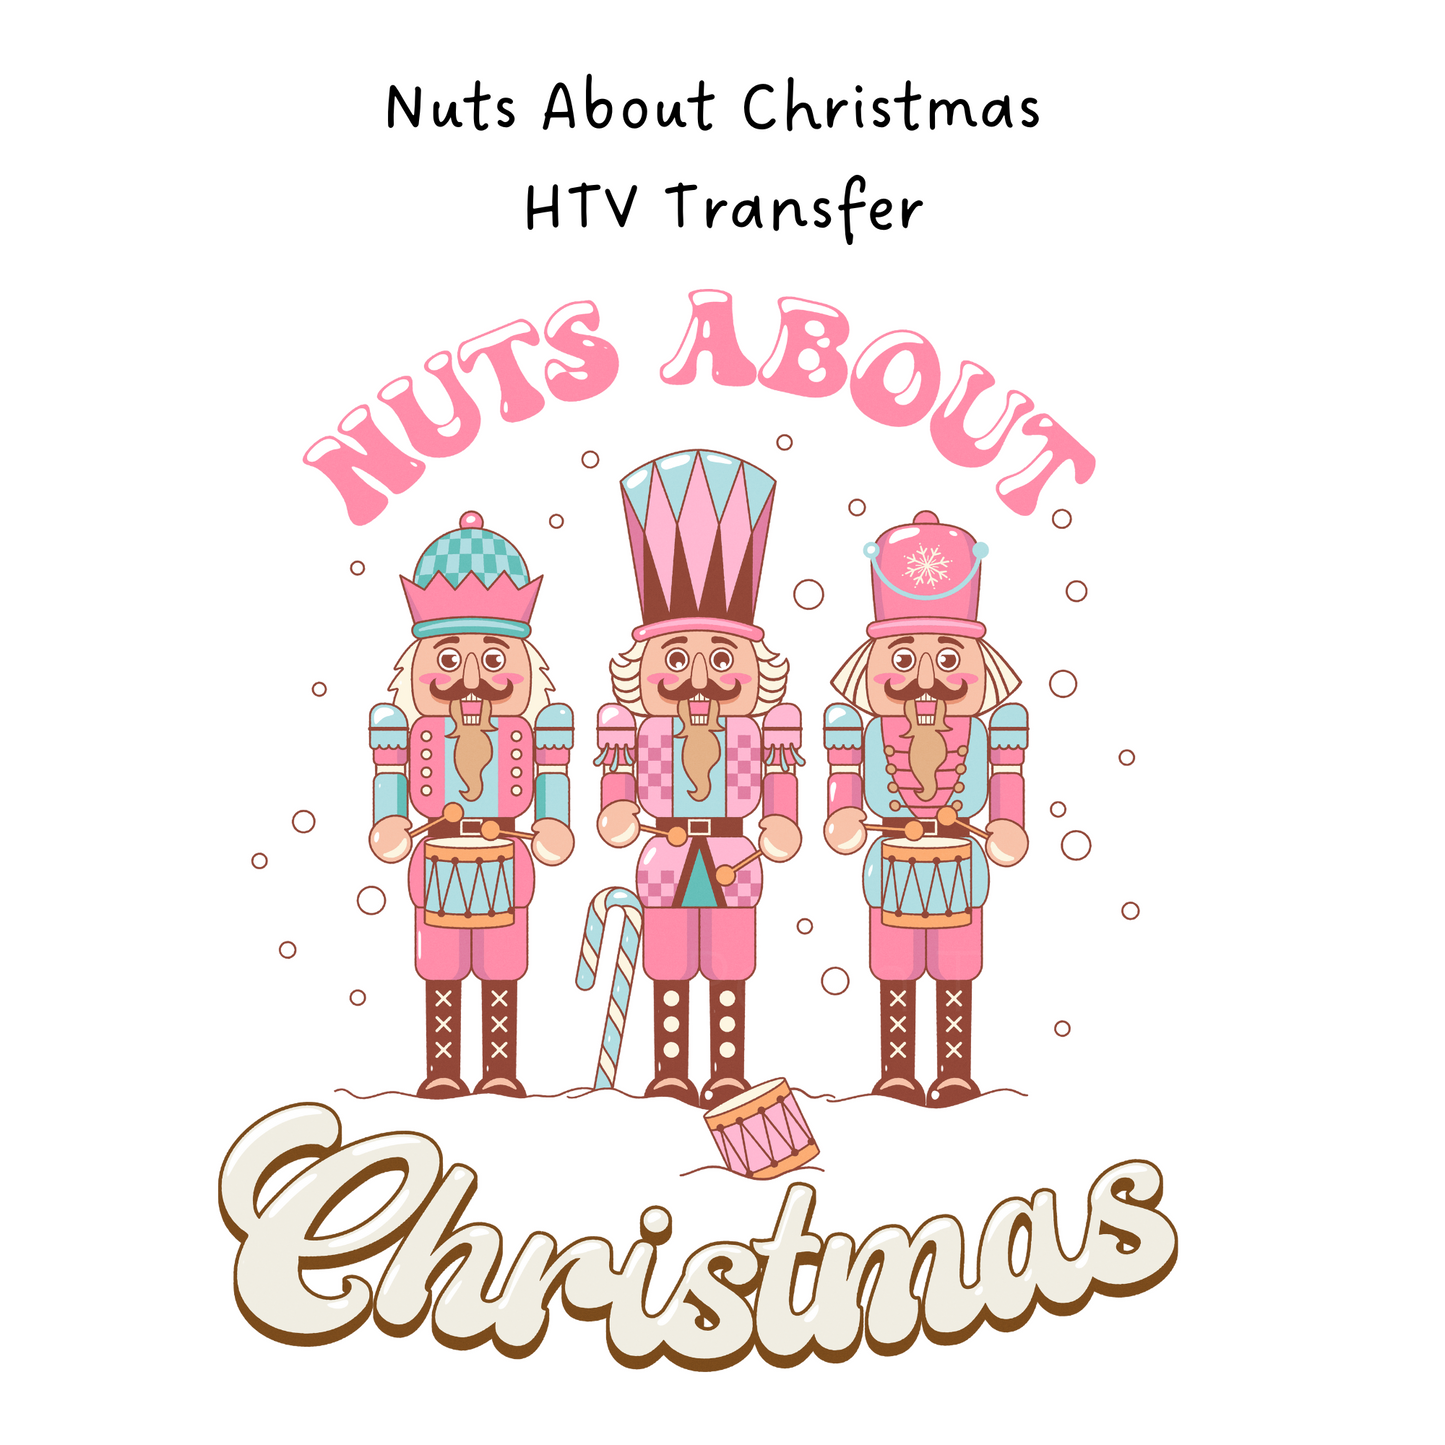 Nuts About Christmas HTV Transfer